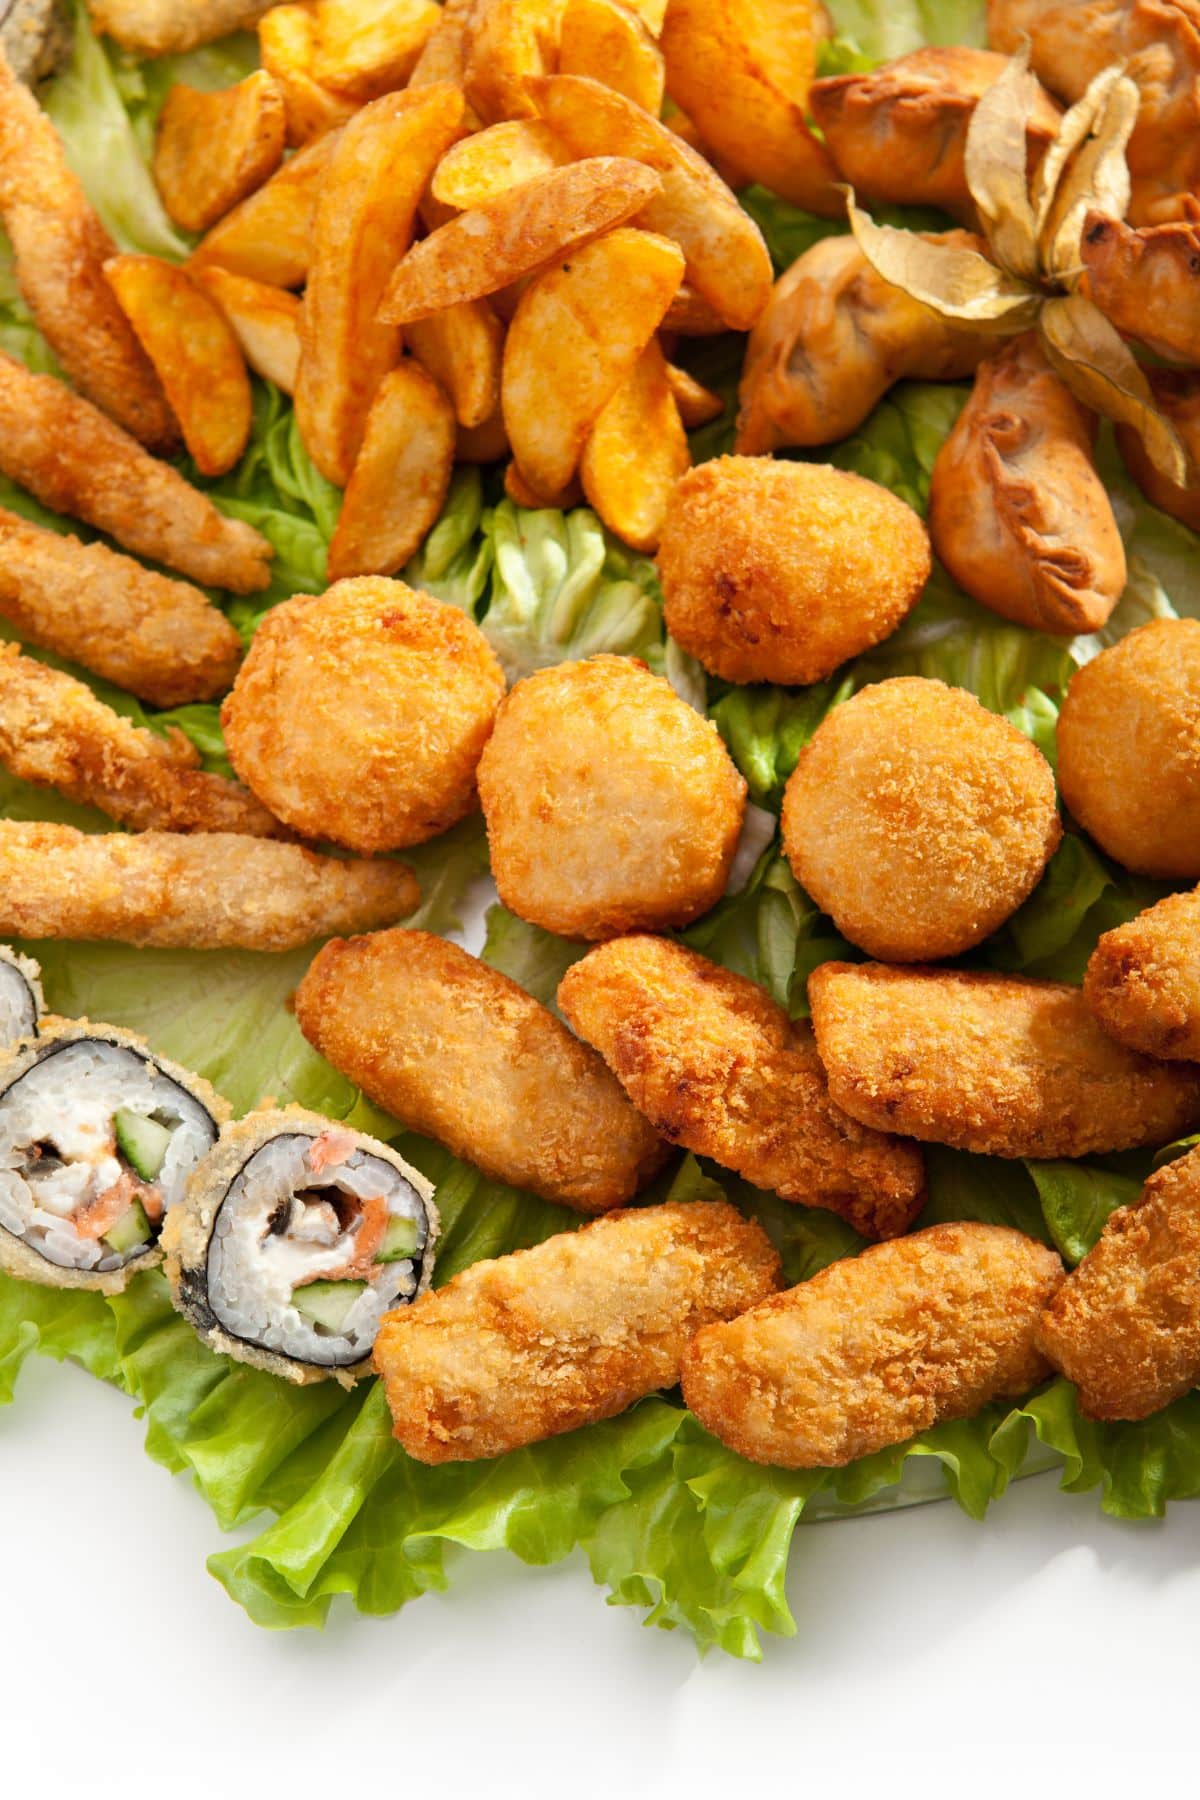 a variety of fried foods on a plate.